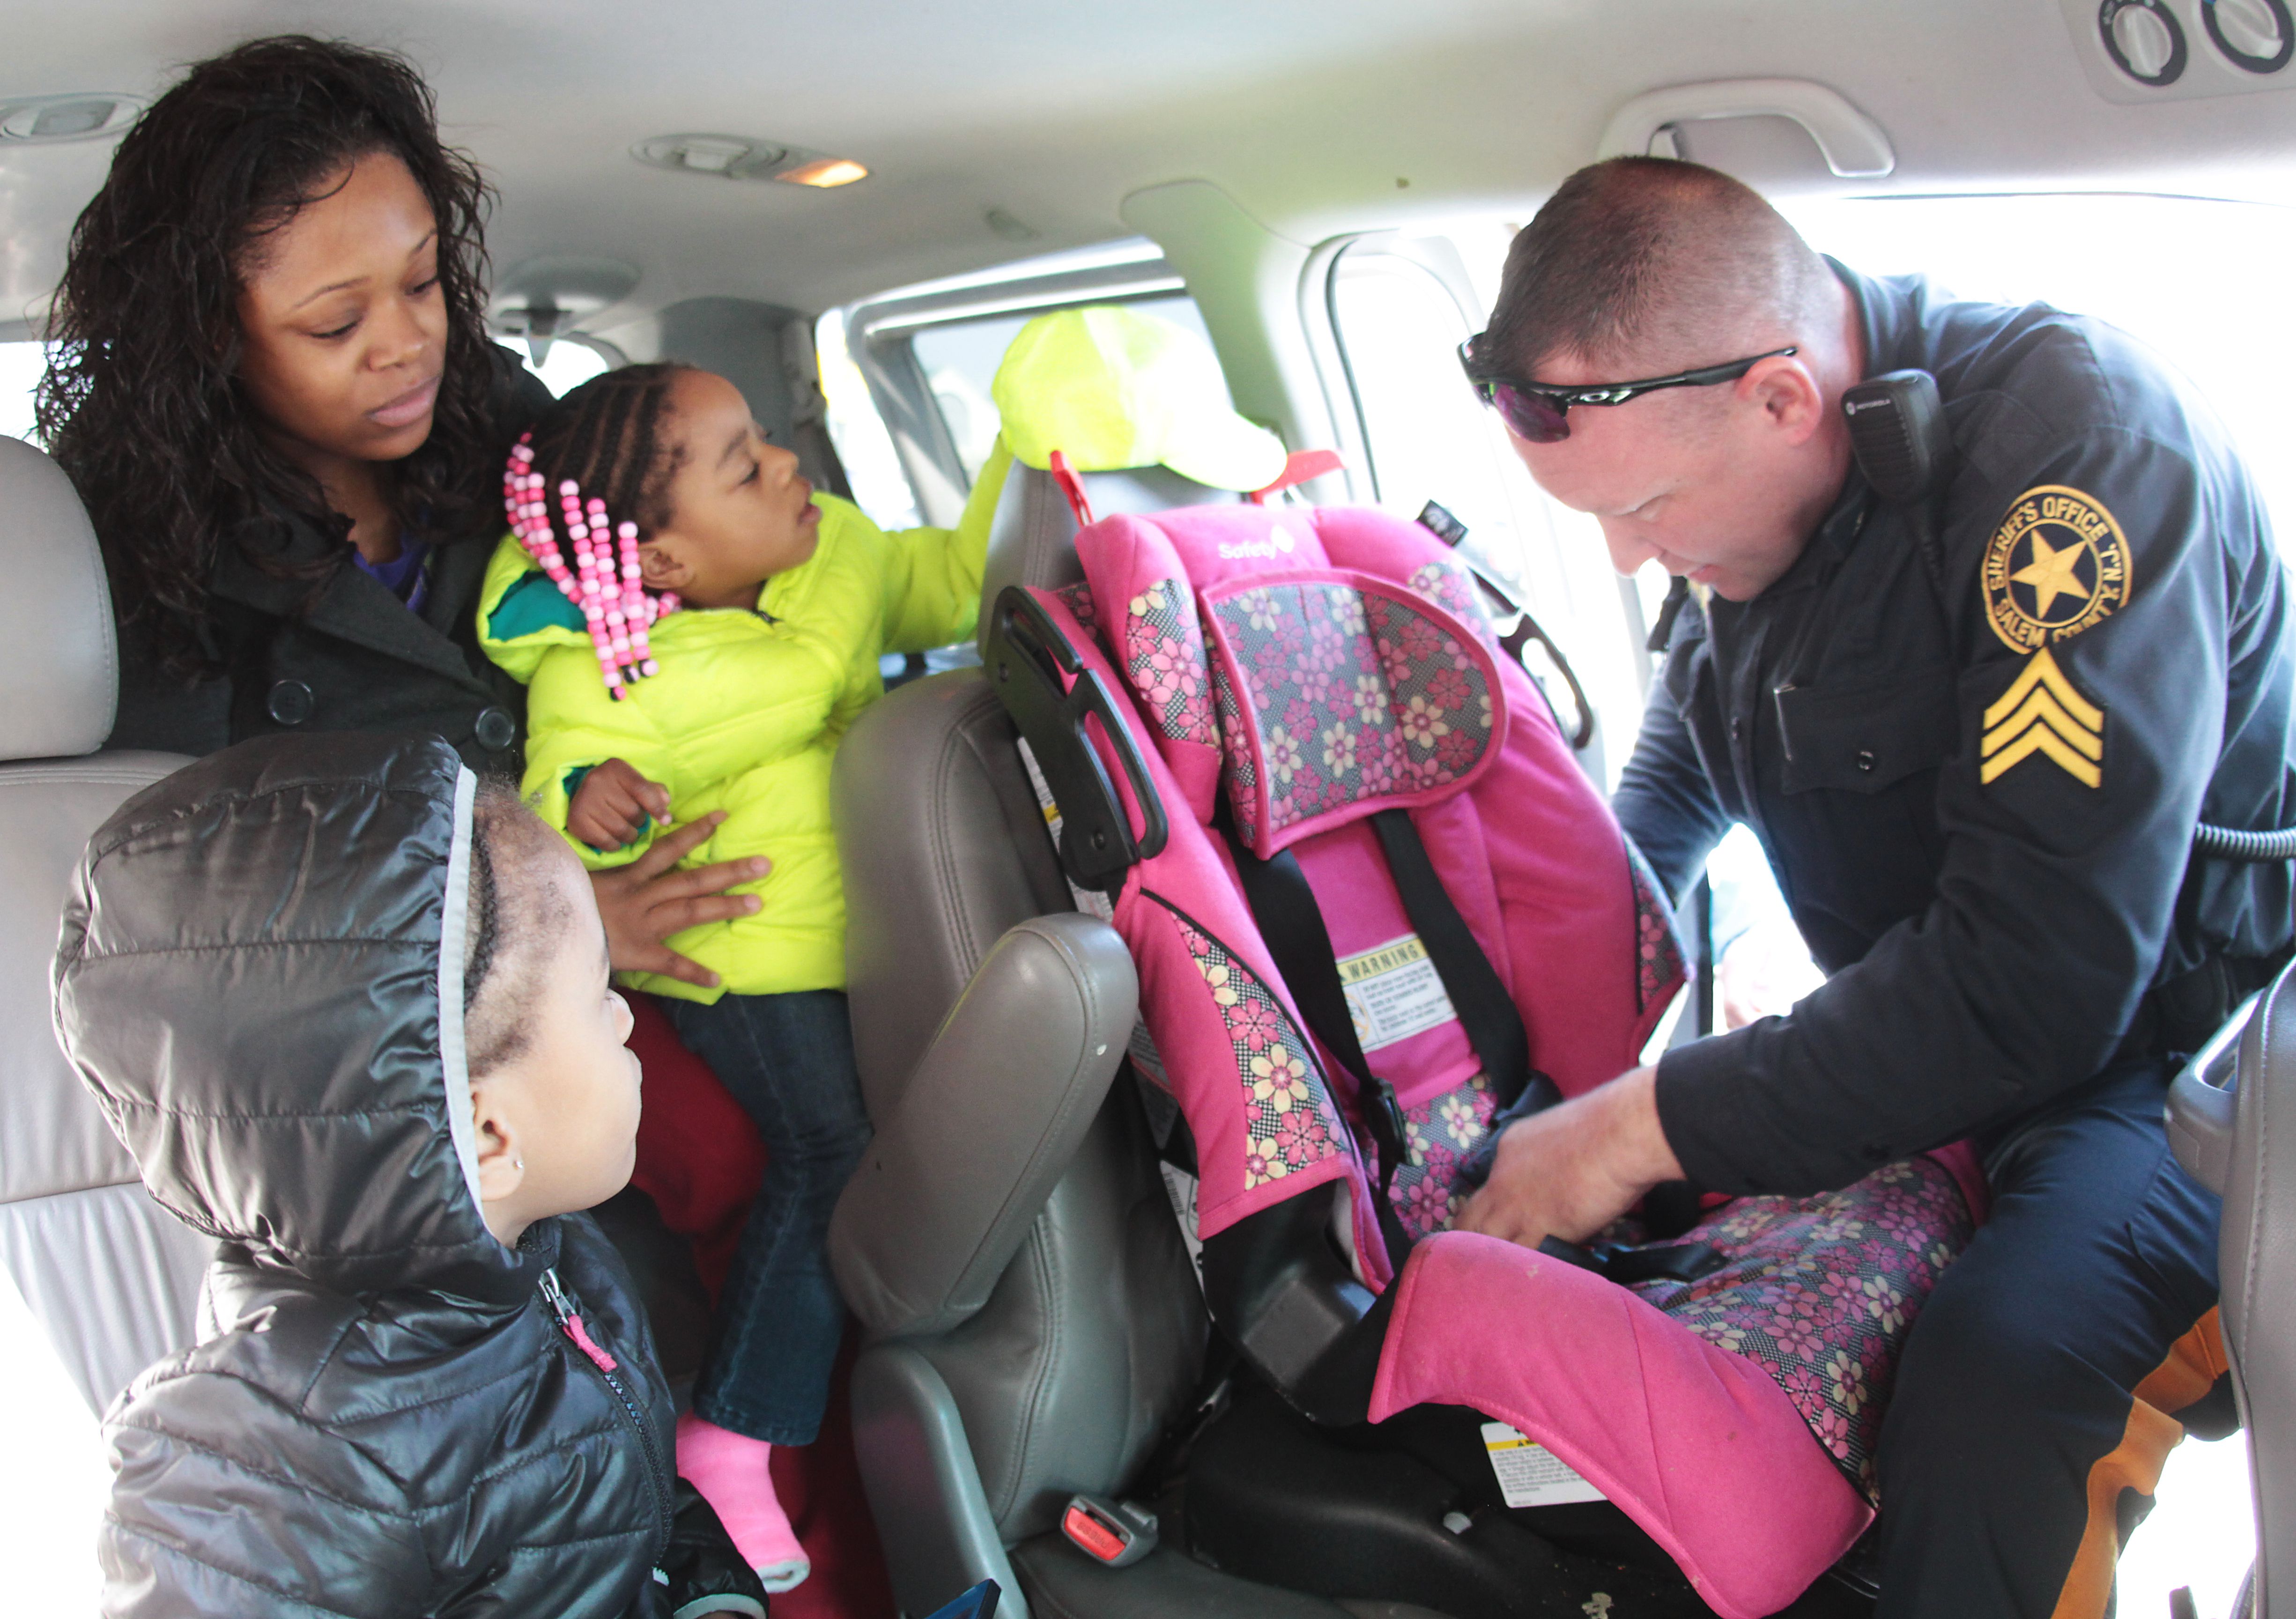 When Can a Child Switch to a Regular Seat Belt?